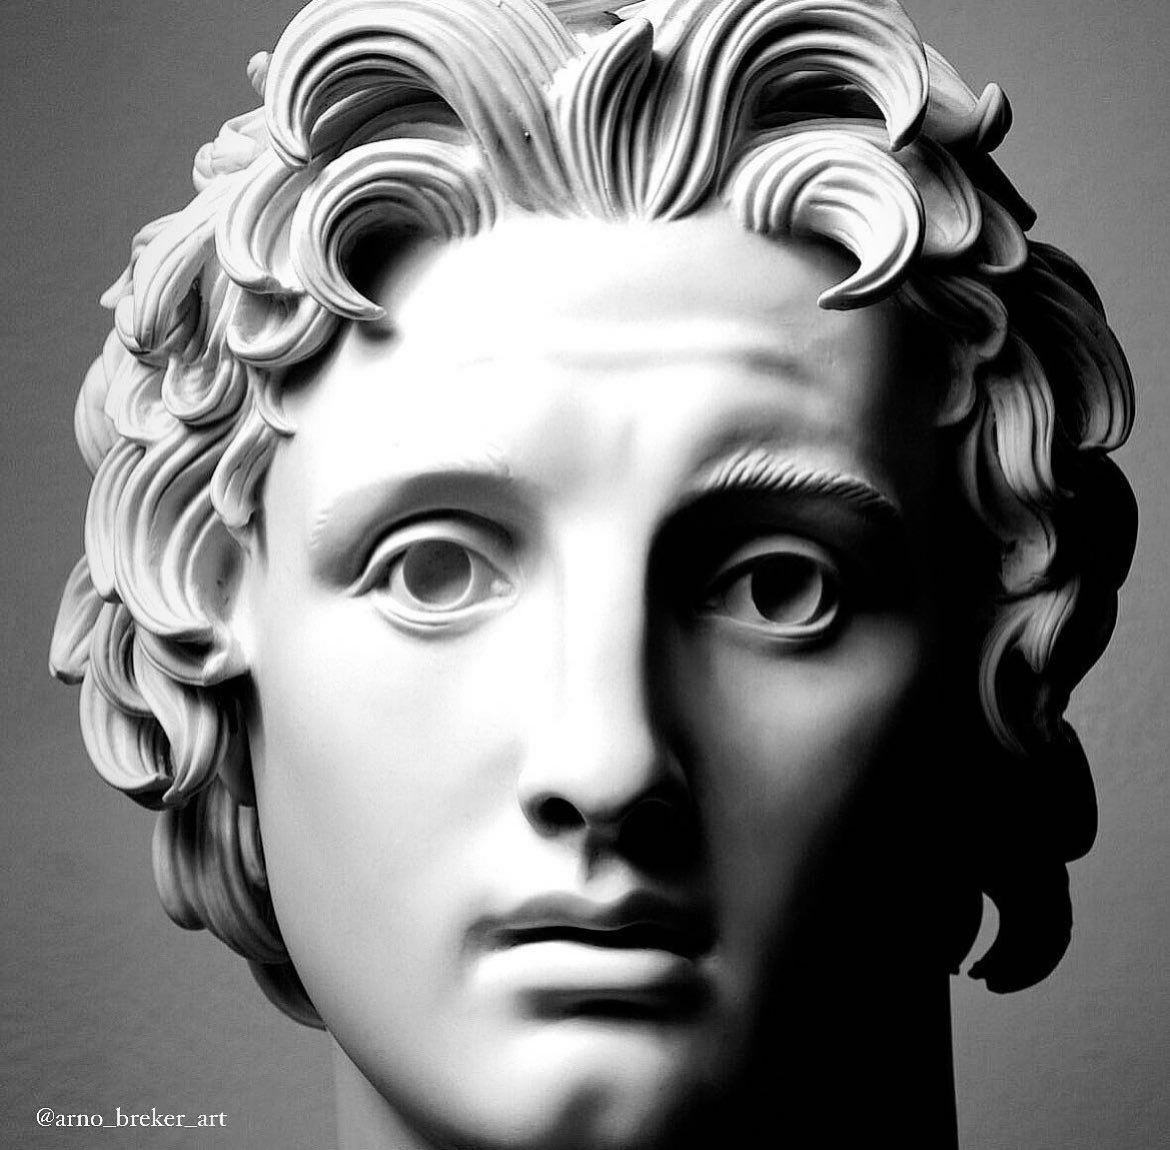 Portrait of Alexander the Great, 1981.

The French writer and Alexander-biographer Roger Peyrefitte asked his friend Breker to make this portrait as a Homage to the young Alexander. 

Photo © Massimo Listri, 2005